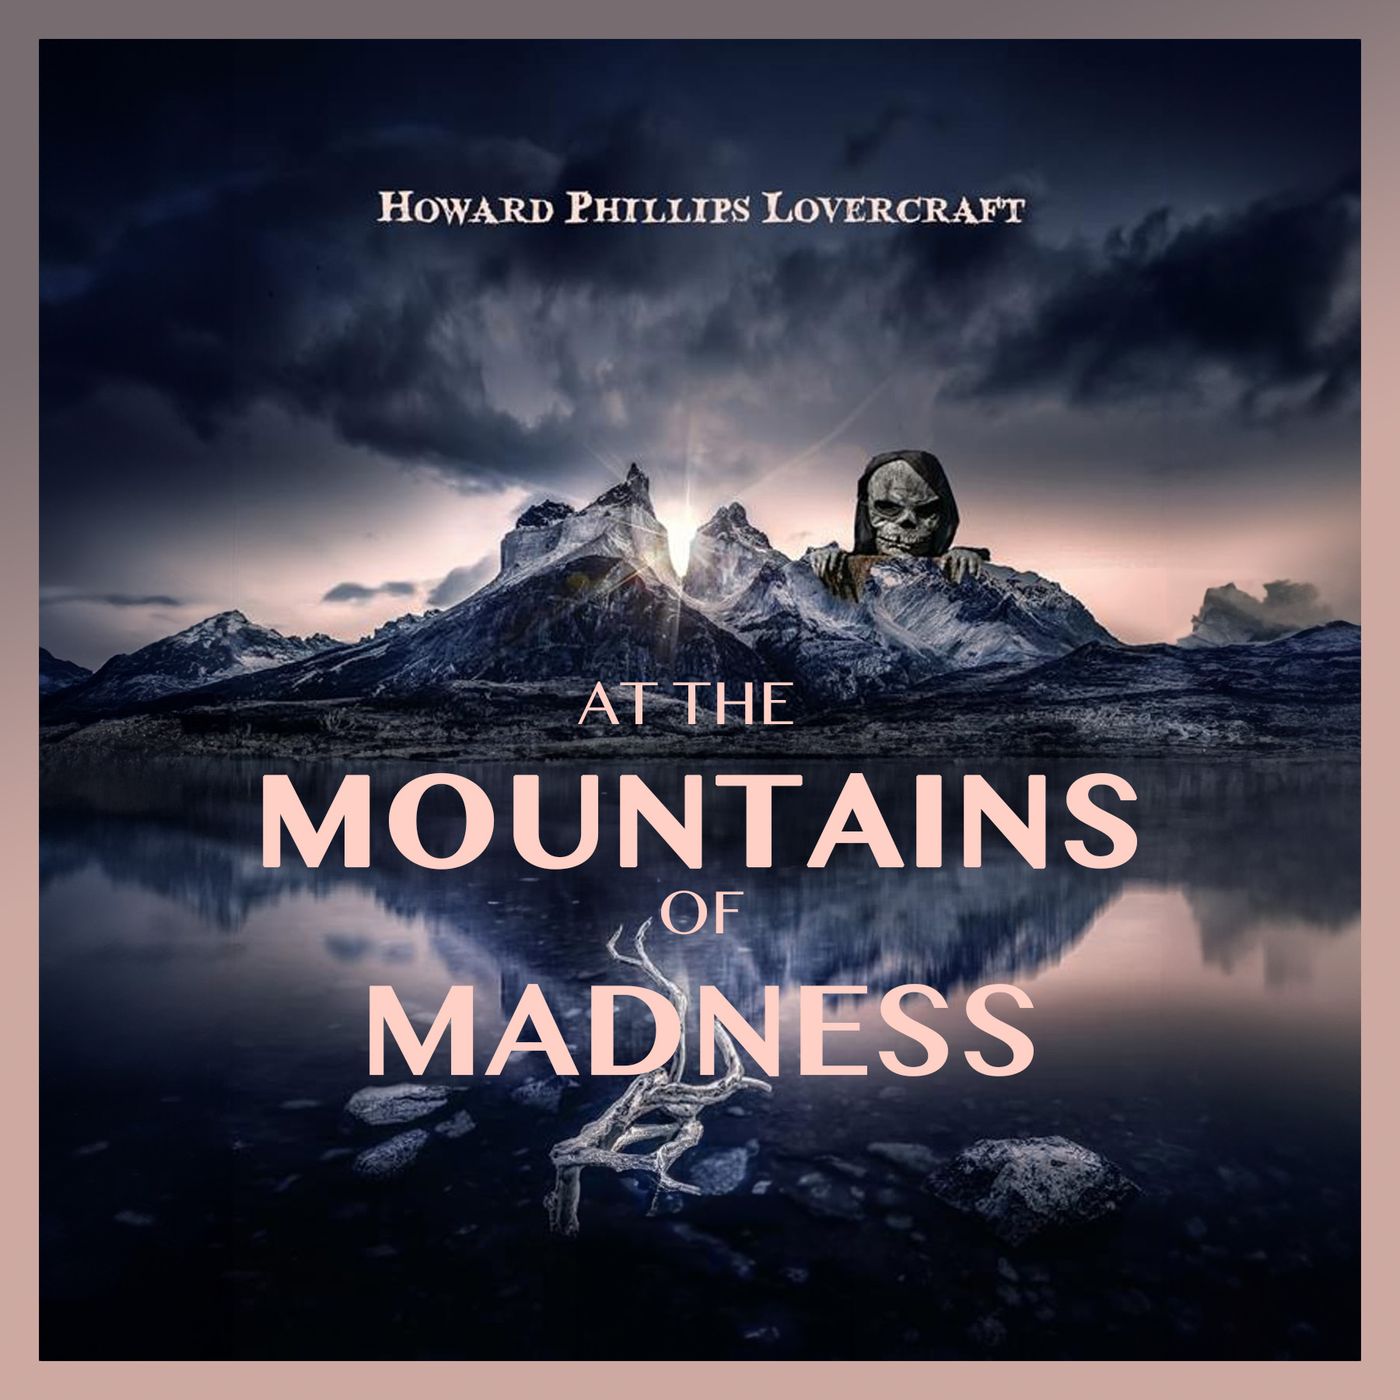 At the Mountains of Madness by H. P. Lovecraft (1890 – 1937)